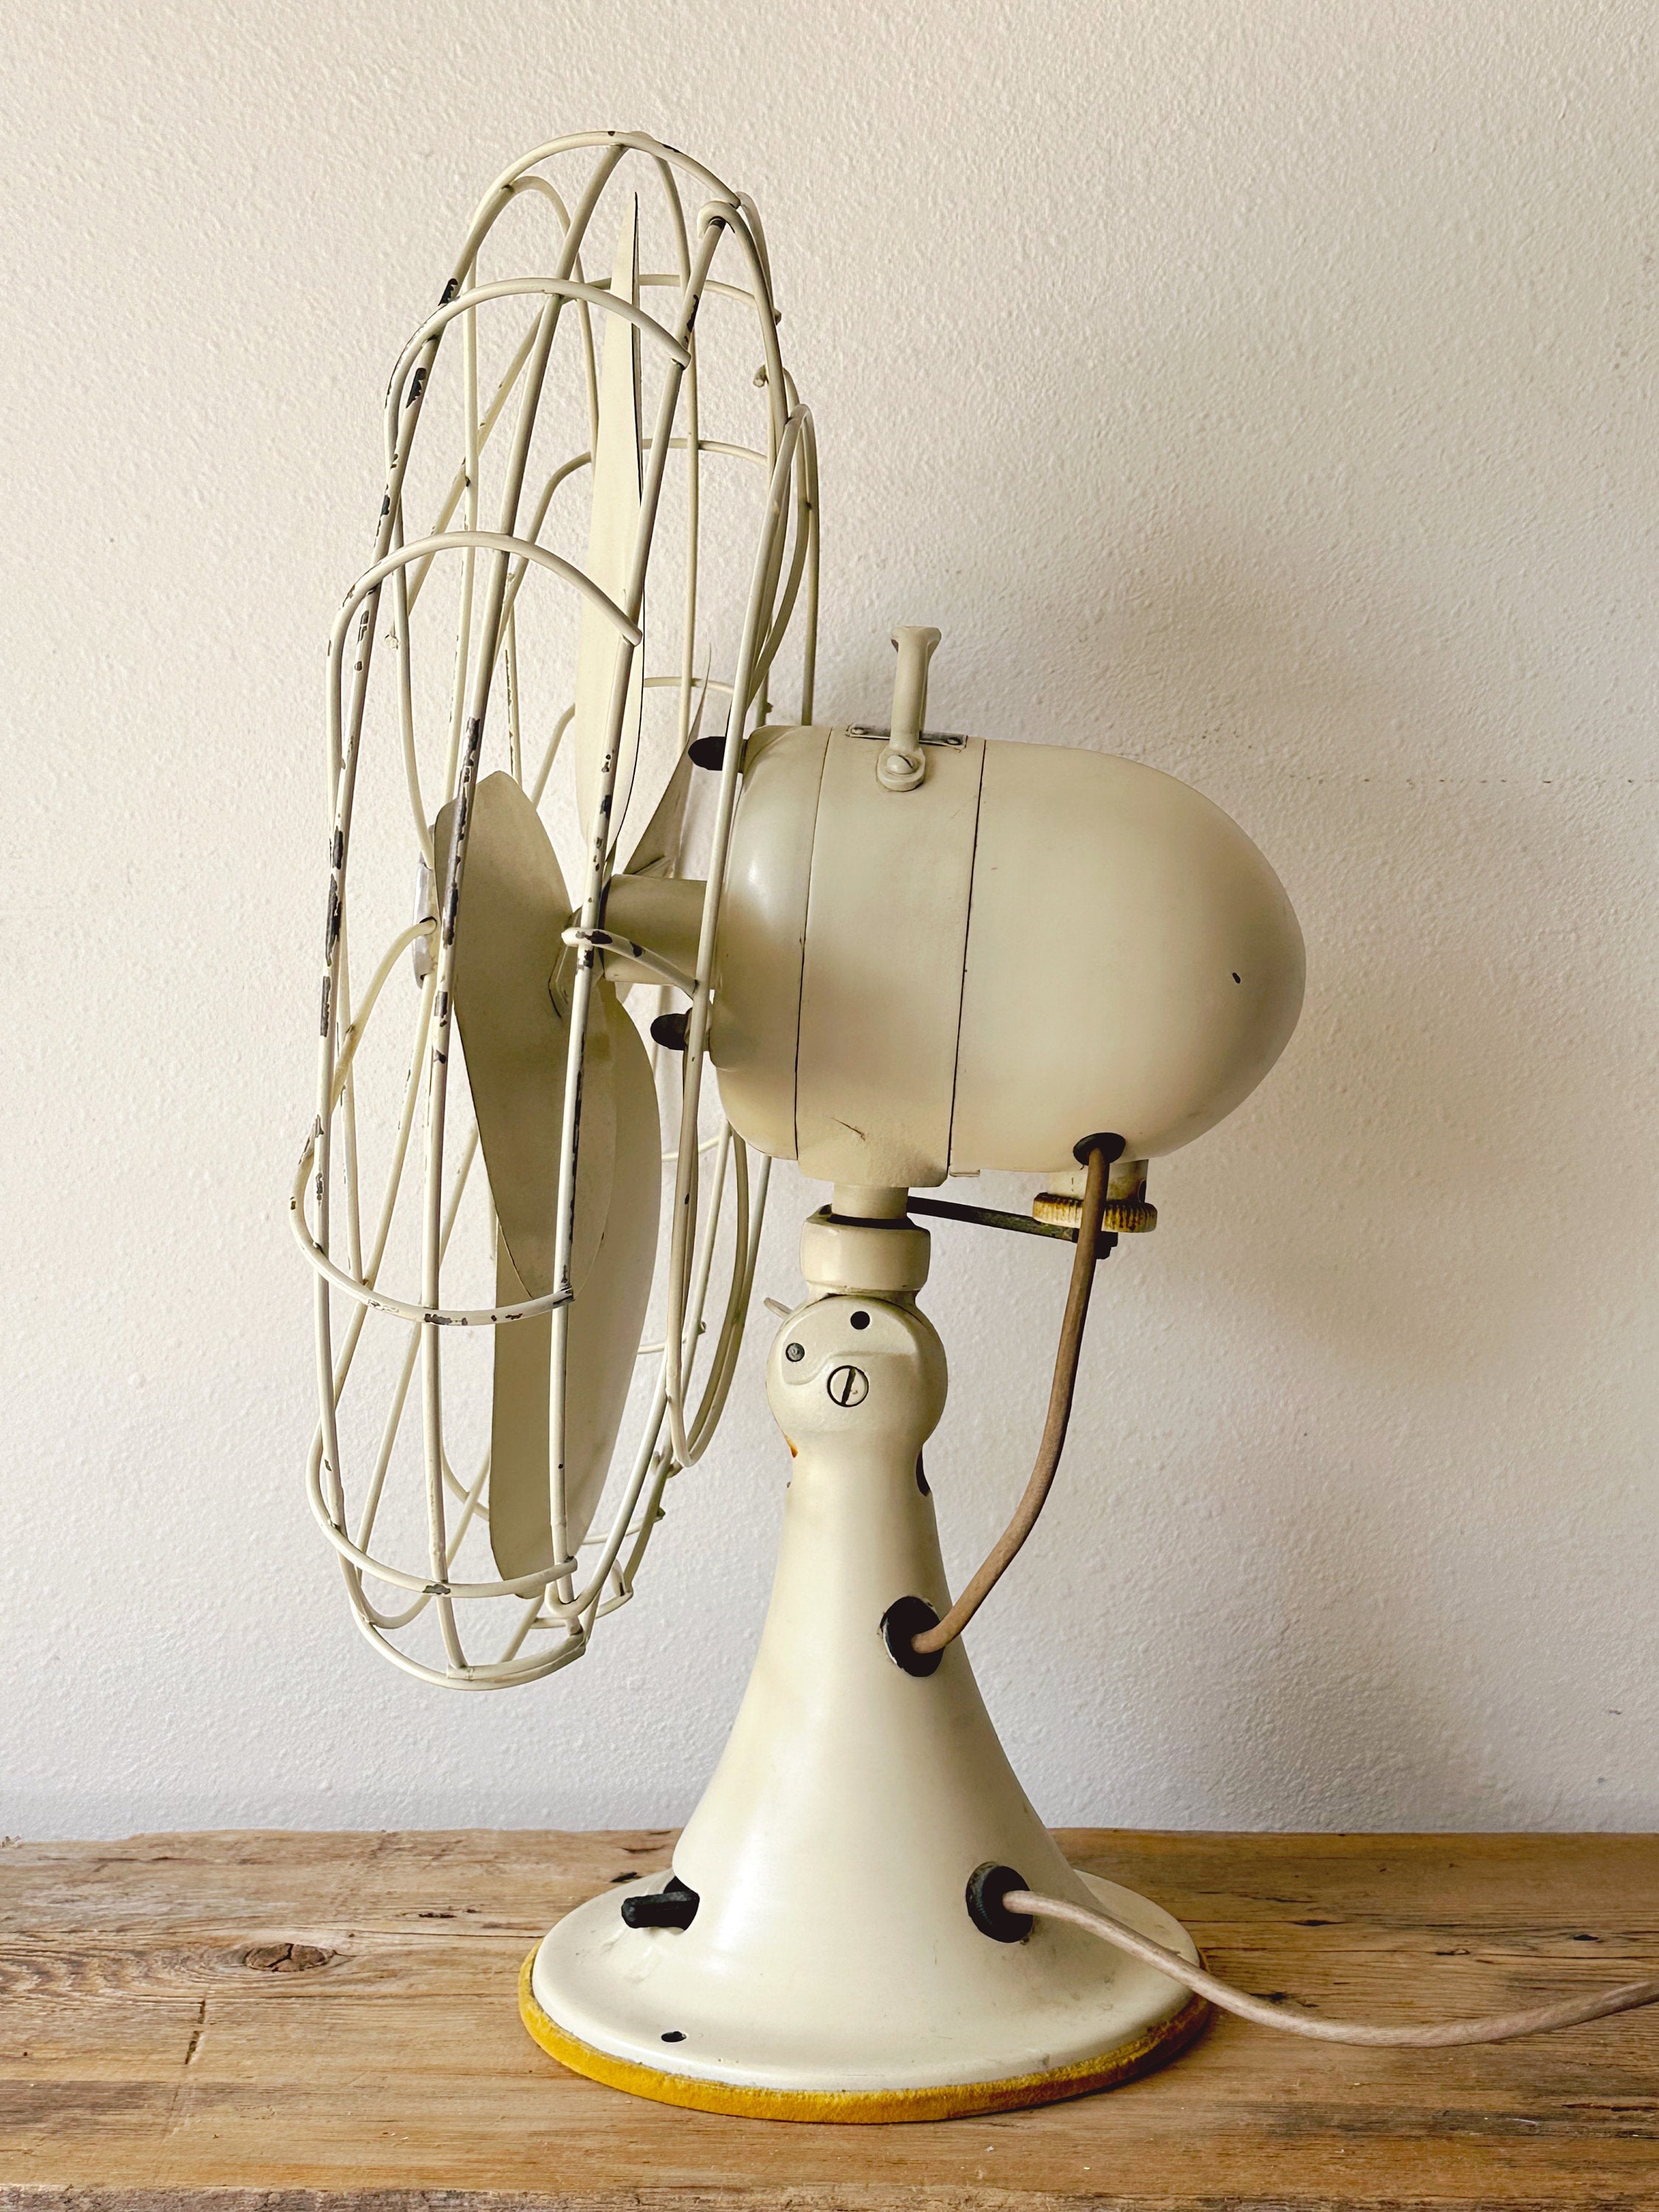 Vintage 1940s Emerson Electric Industrial 3-Speed Oscillating Electric Fan in White | 4-Blade Table Fan Model 79648-AX in Working Condition